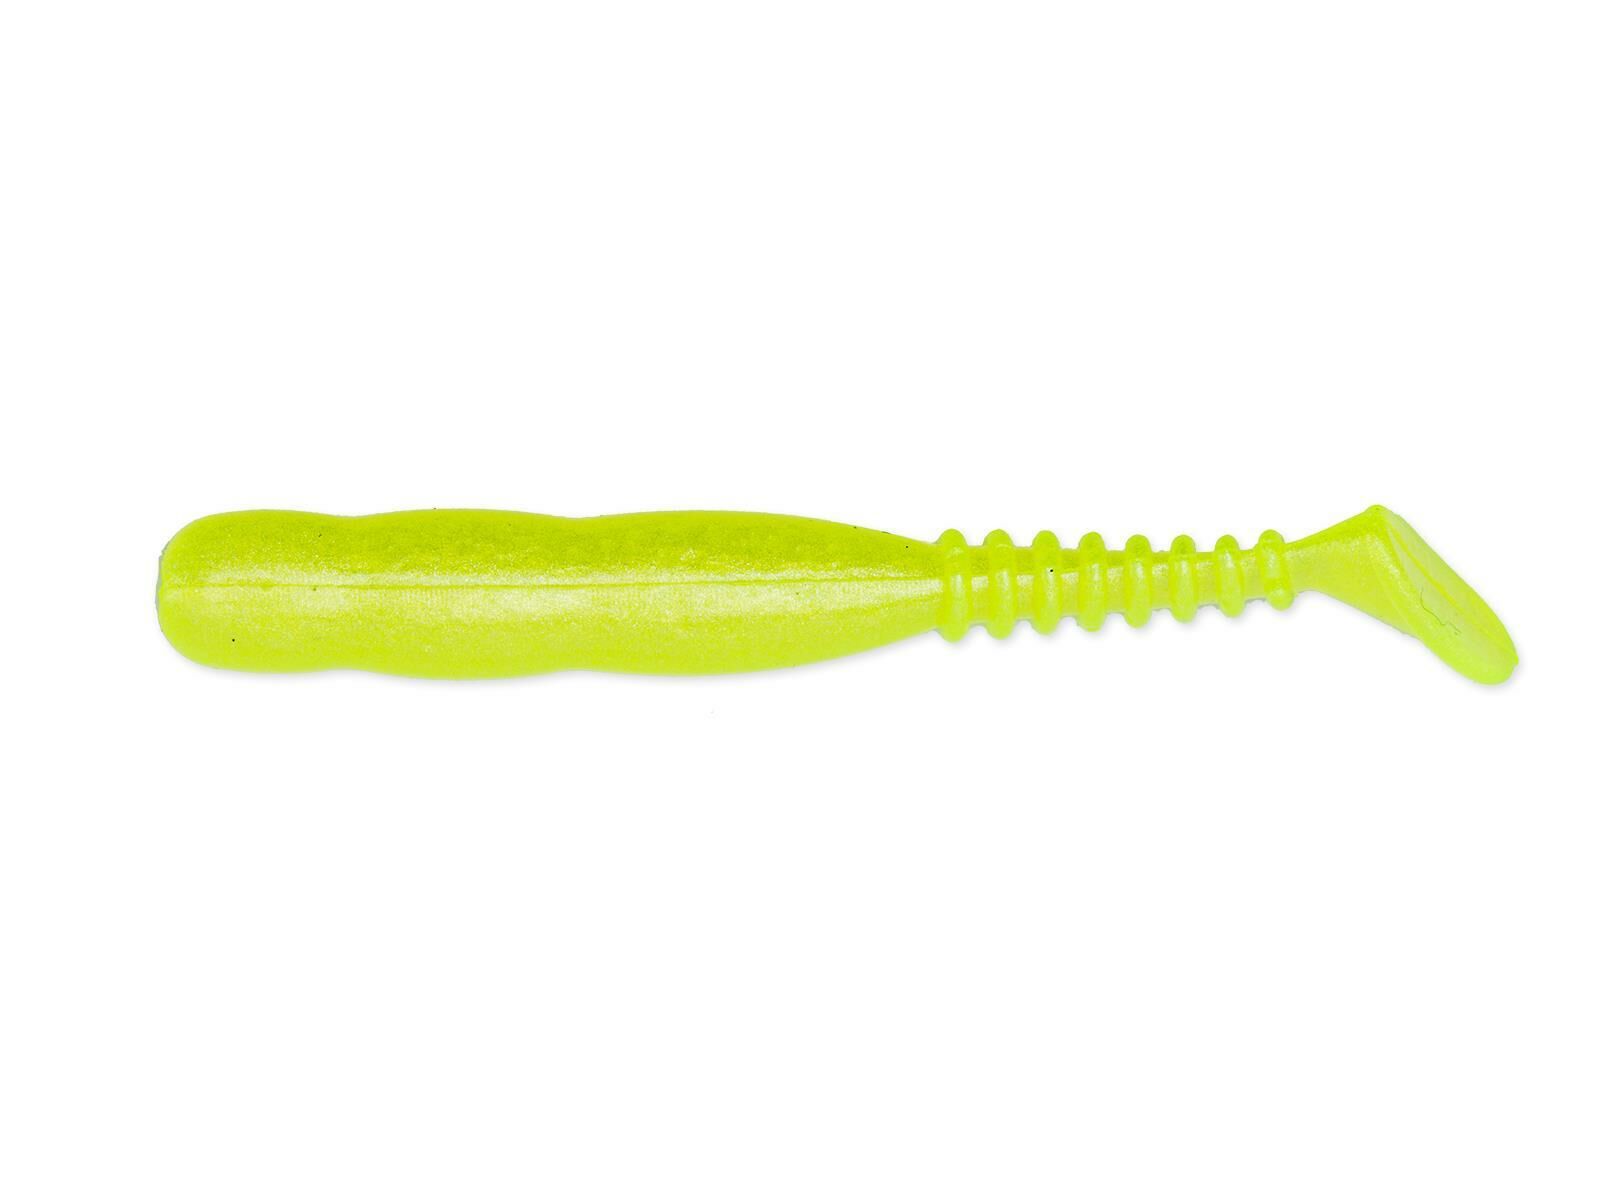 3" Rockvibe Shad - Chartreuse Pearl (No Scent)